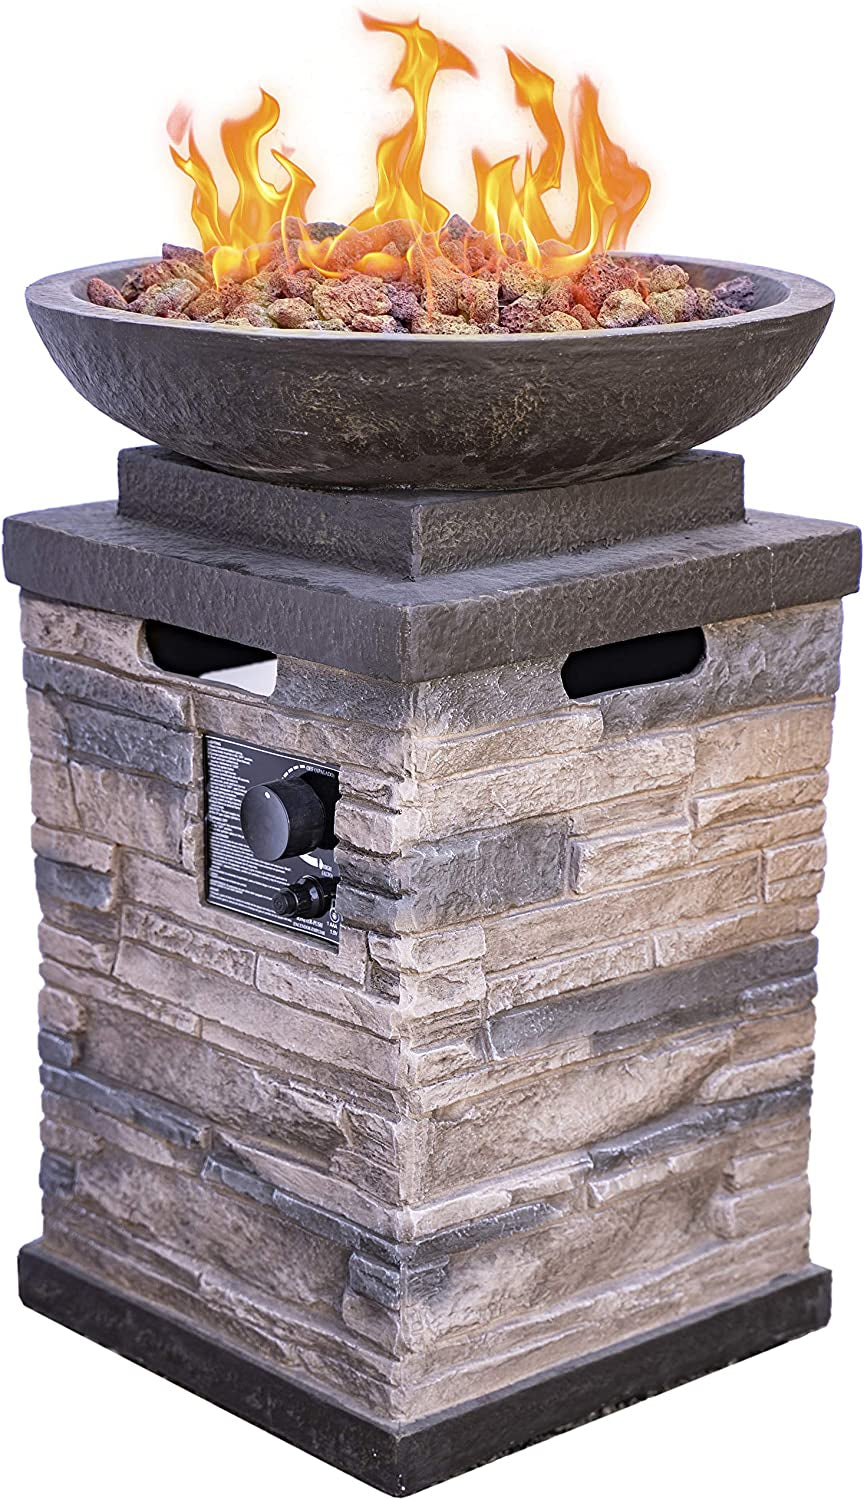 63172 Newcastle Propane Firebowl Column Realistic Look Firepit Heater Lava Rock 40,000 BTU Outdoor Gas Fire Pit 20 Lb, Pack of 1, Natural Stone